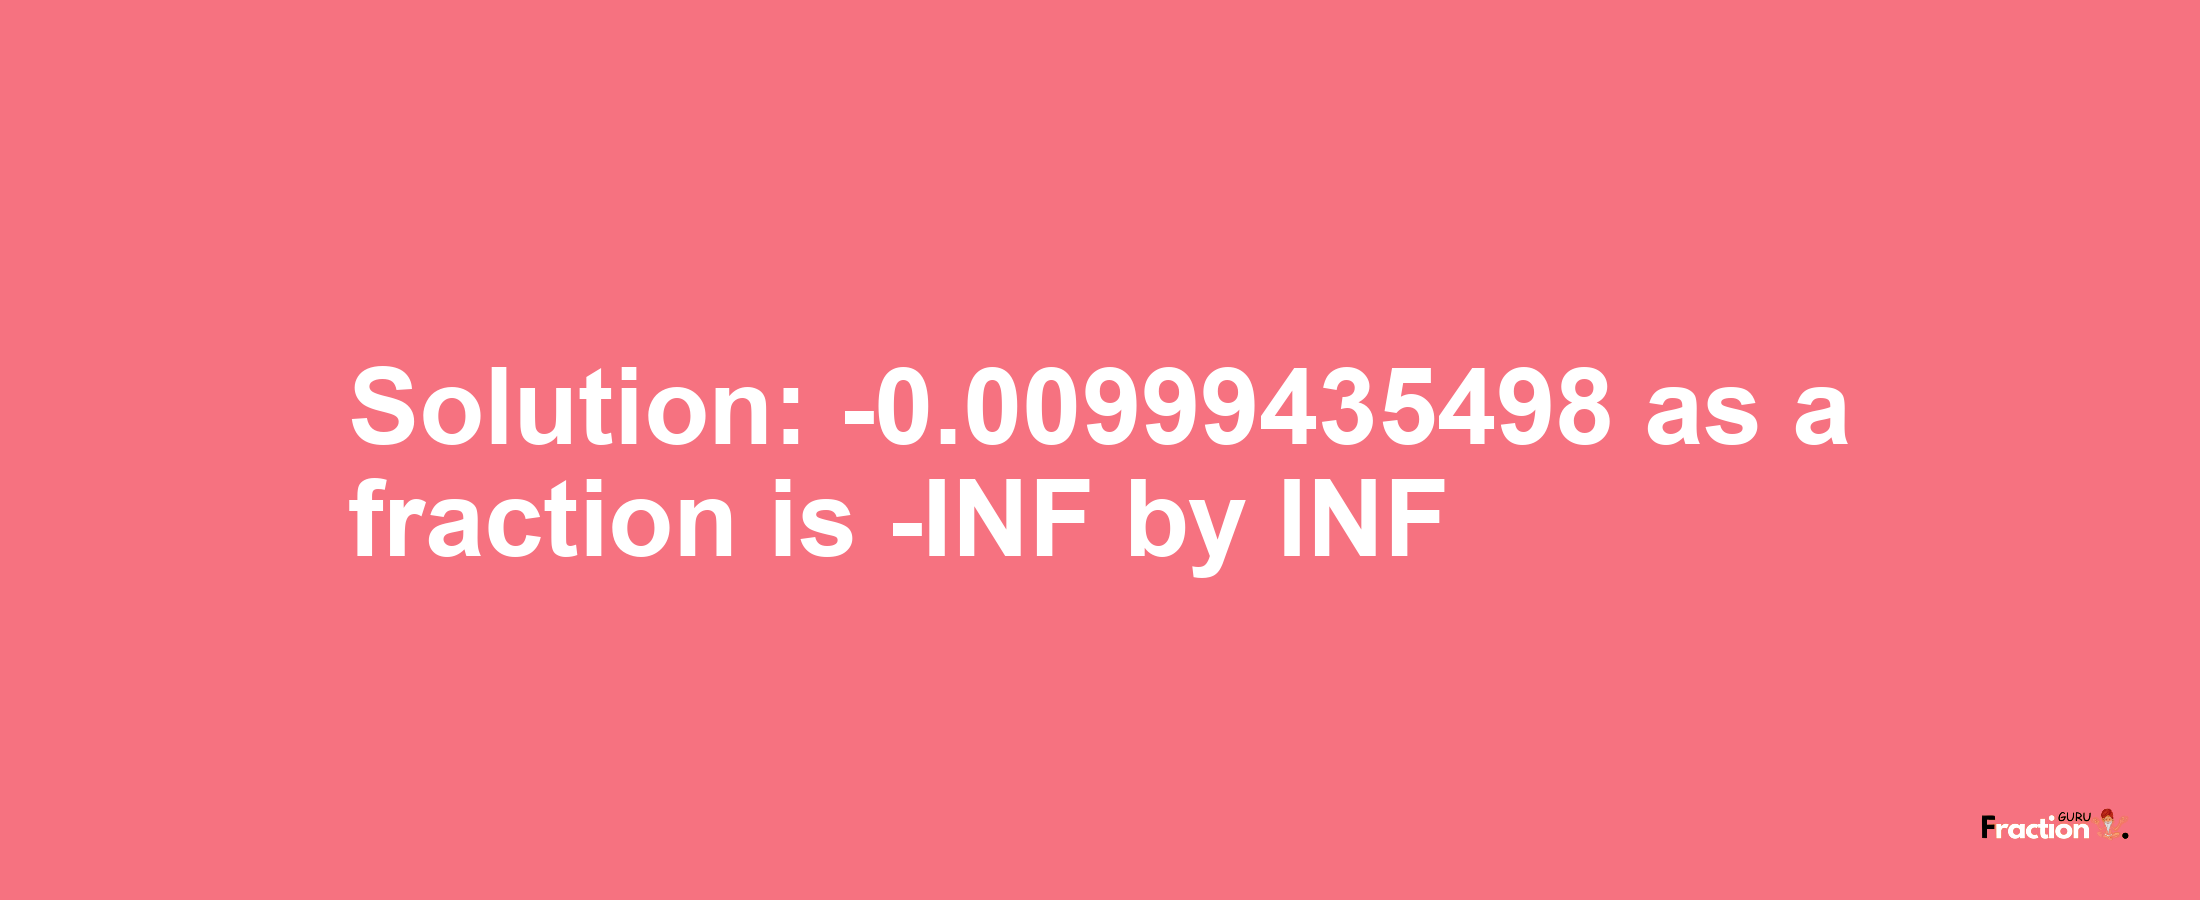 Solution:-0.00999435498 as a fraction is -INF/INF